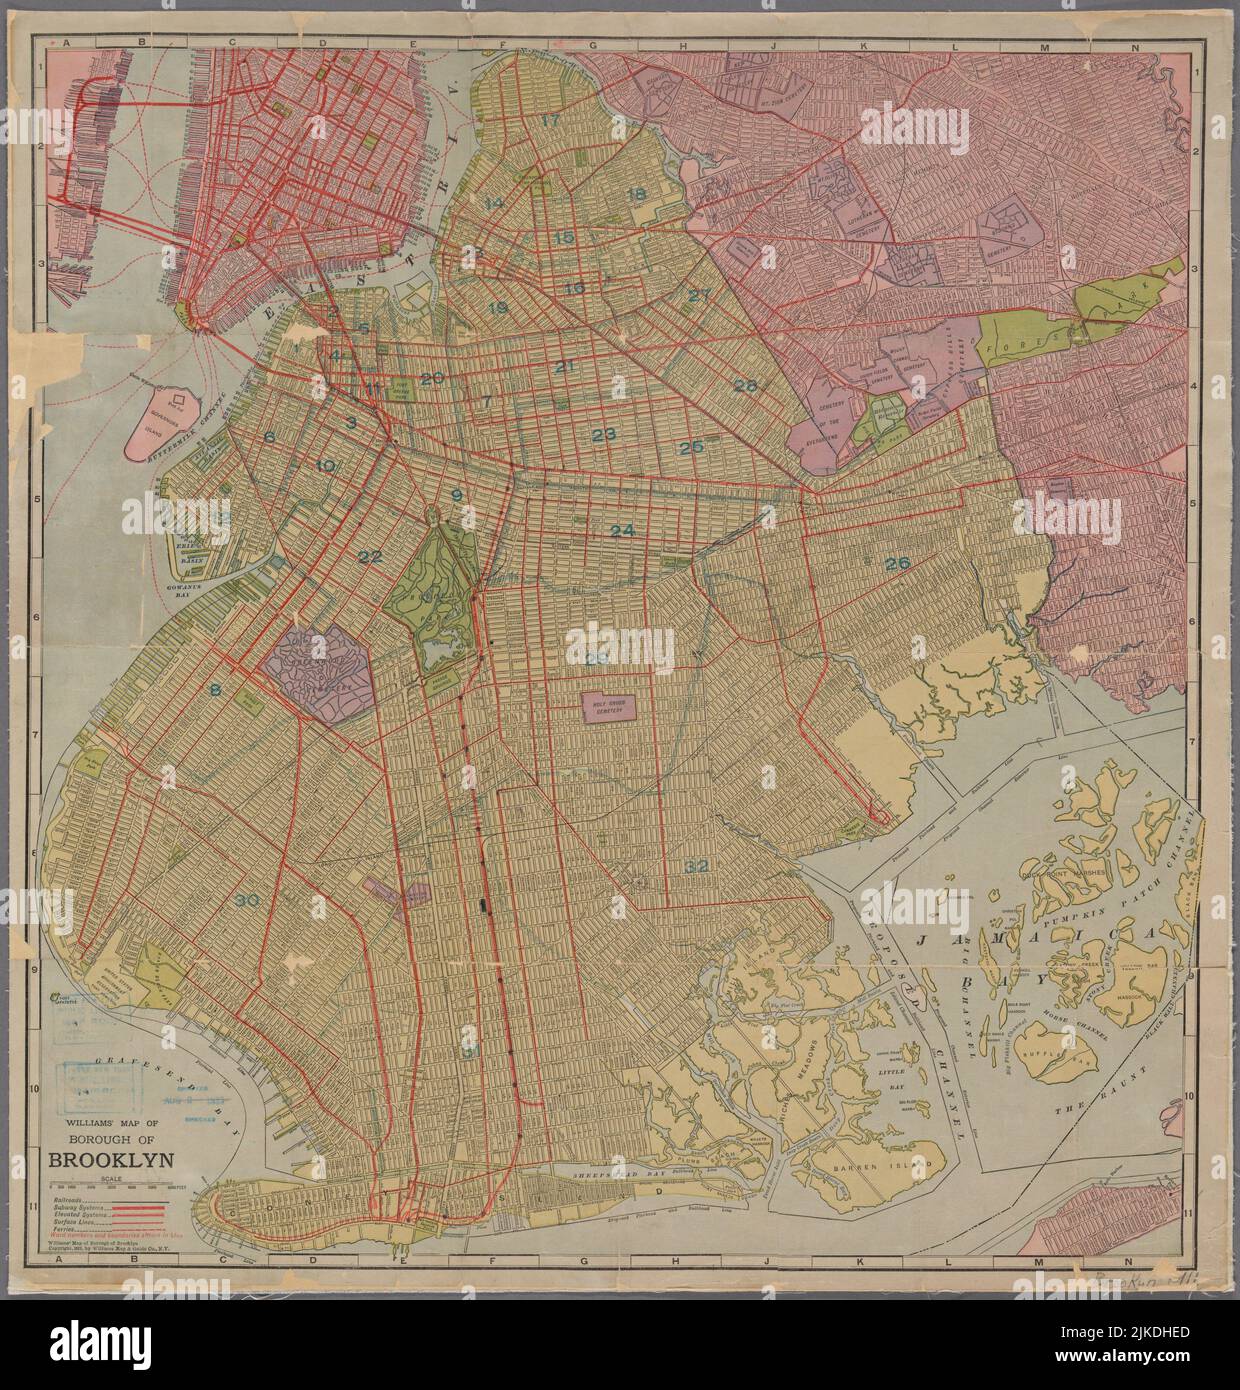 Williams' map of Borough of Brooklyn. Maps of New York City and State New York City Brooklyn. Date Issued: 1911 Place: New York Publisher: Williams Stock Photo